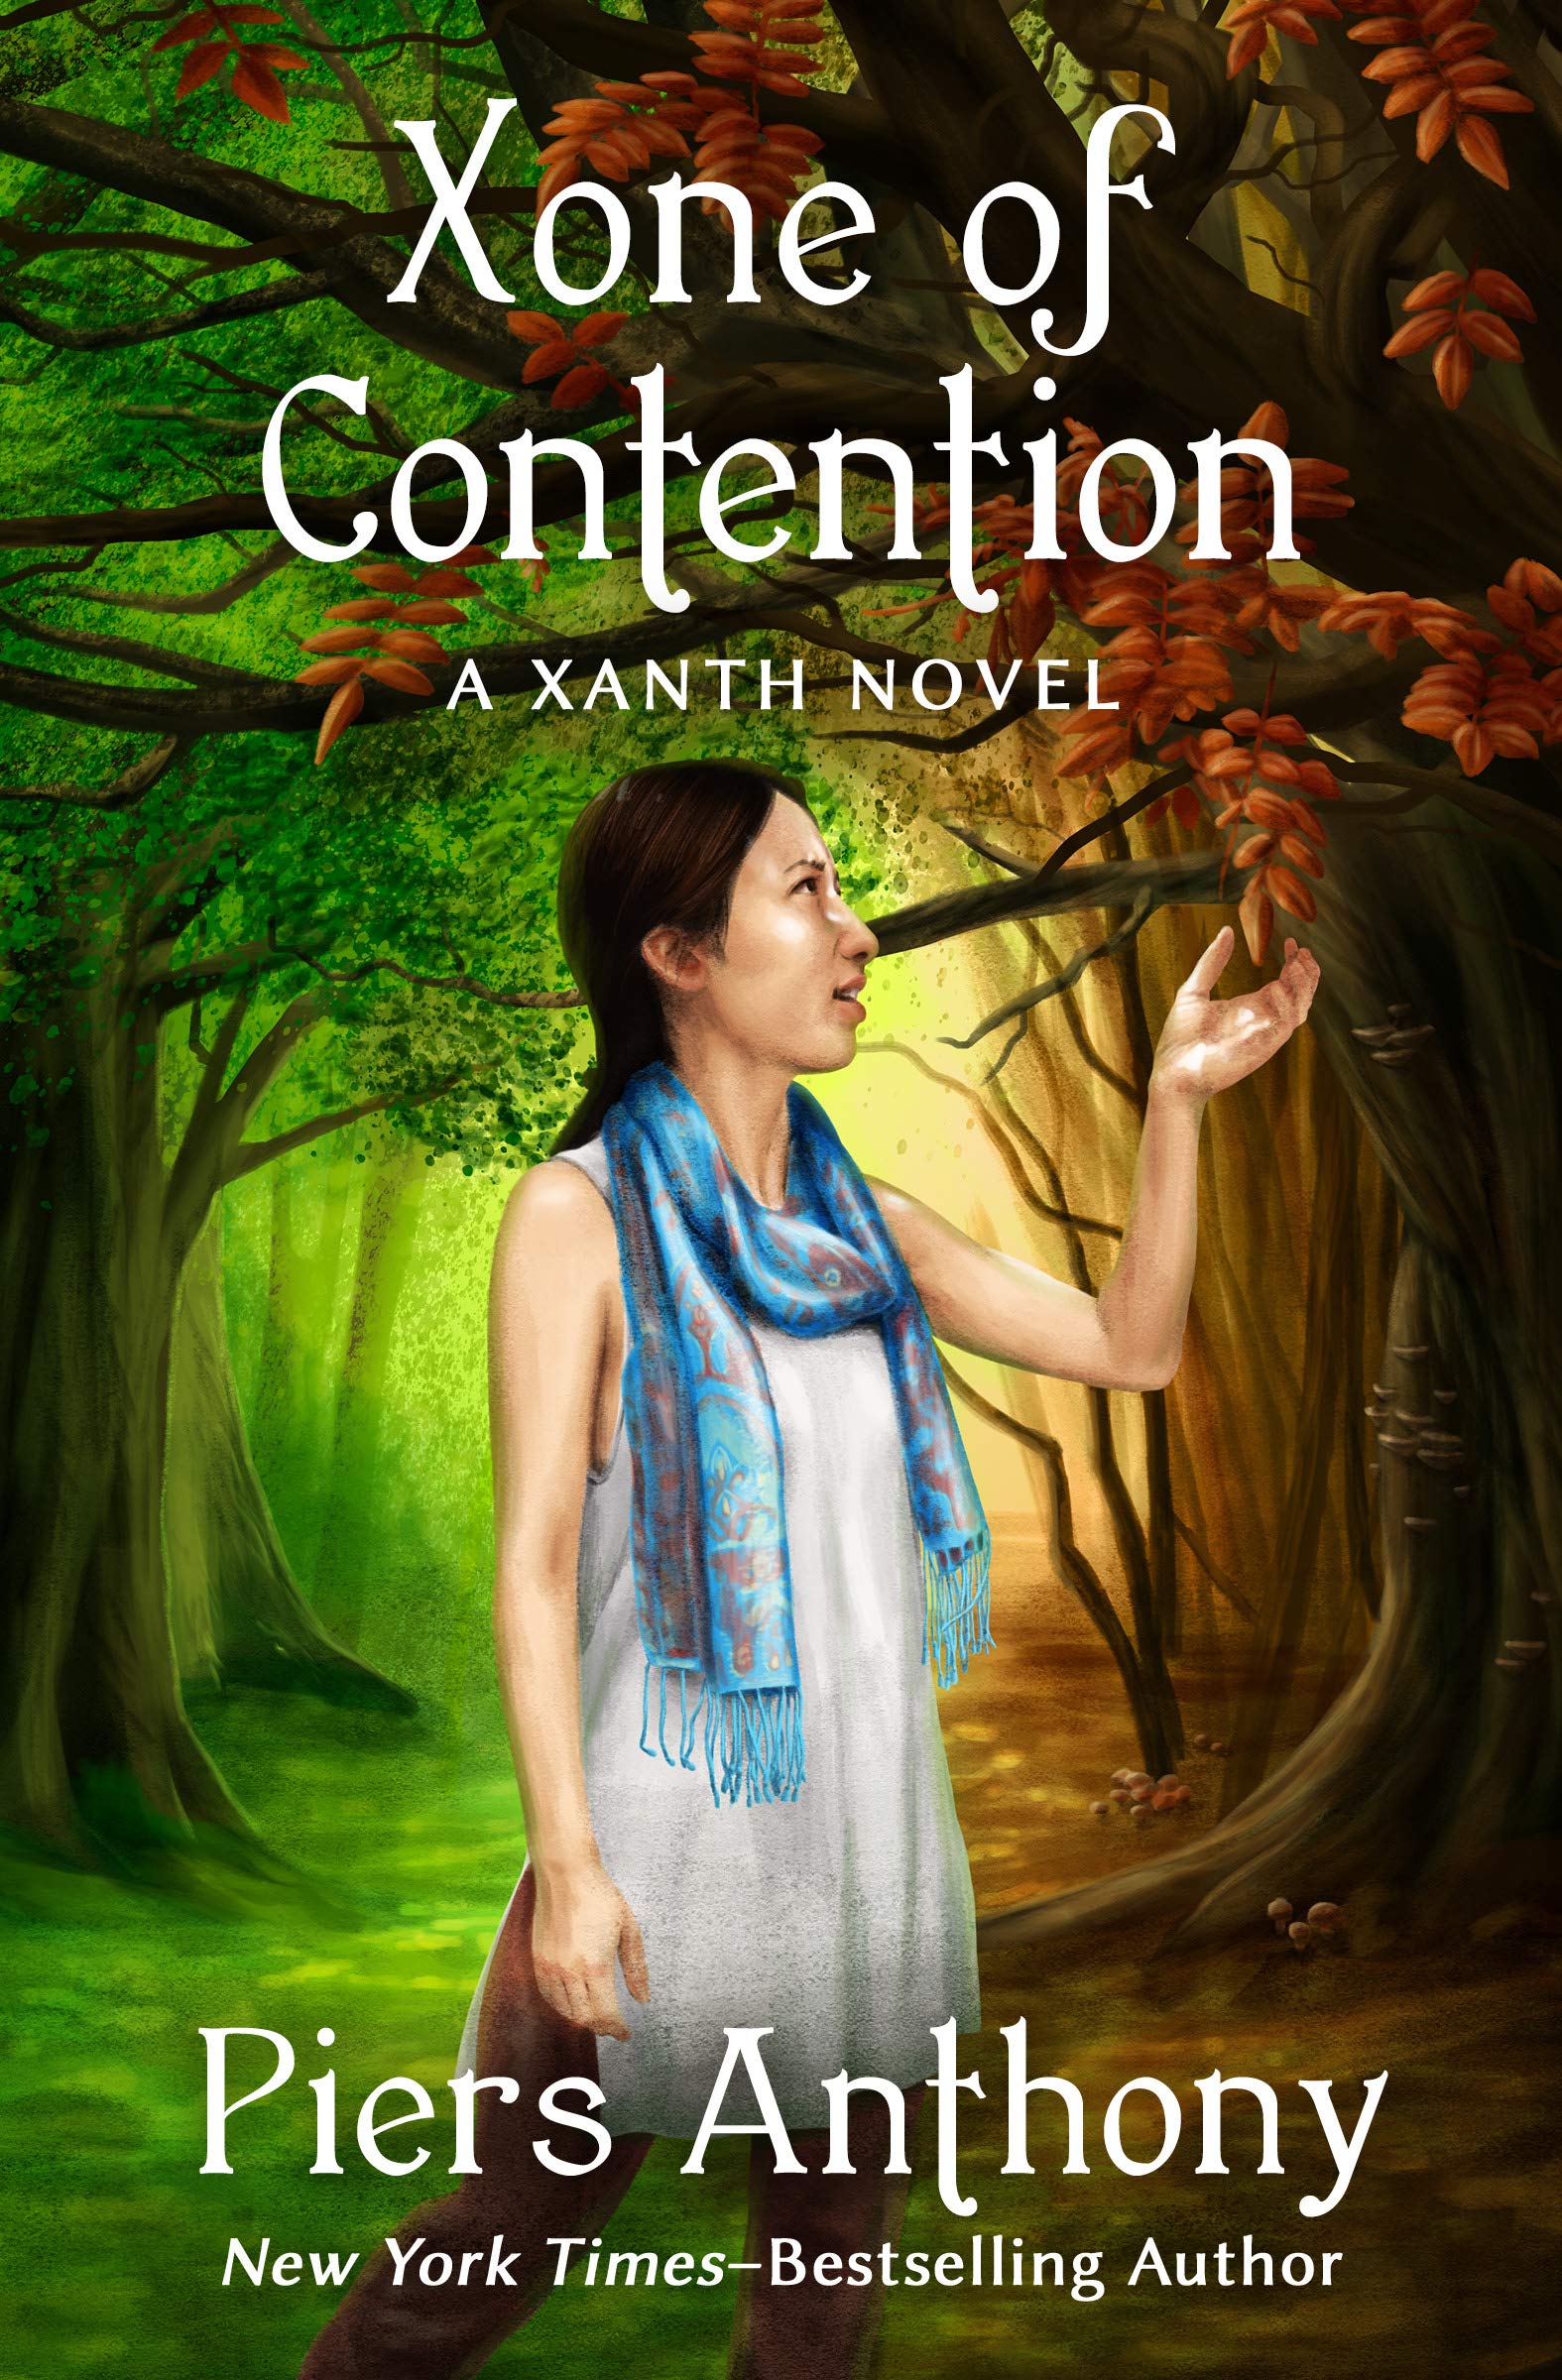 Xone of Contention (The Xanth Novels)